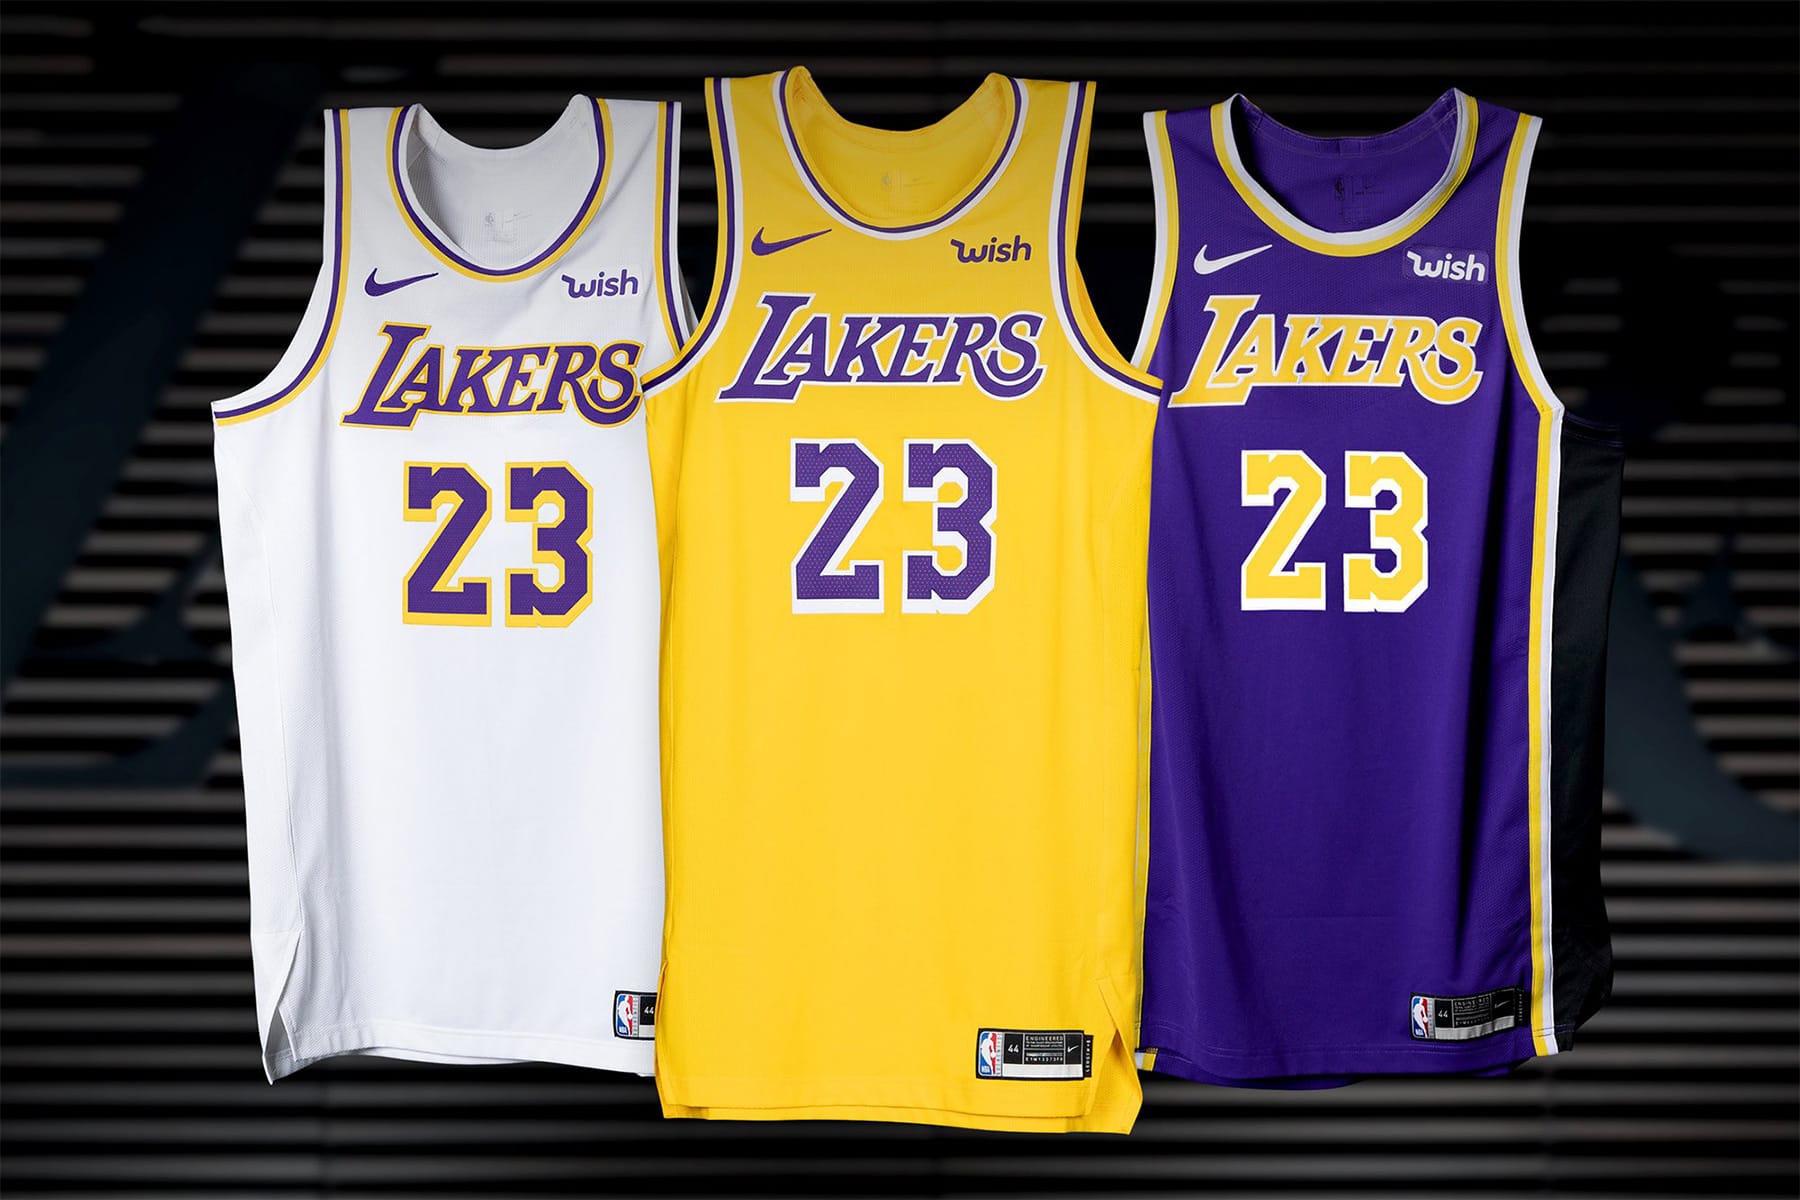 los angeles lakers baseball jersey Off 57% - www.bashhguidelines.org